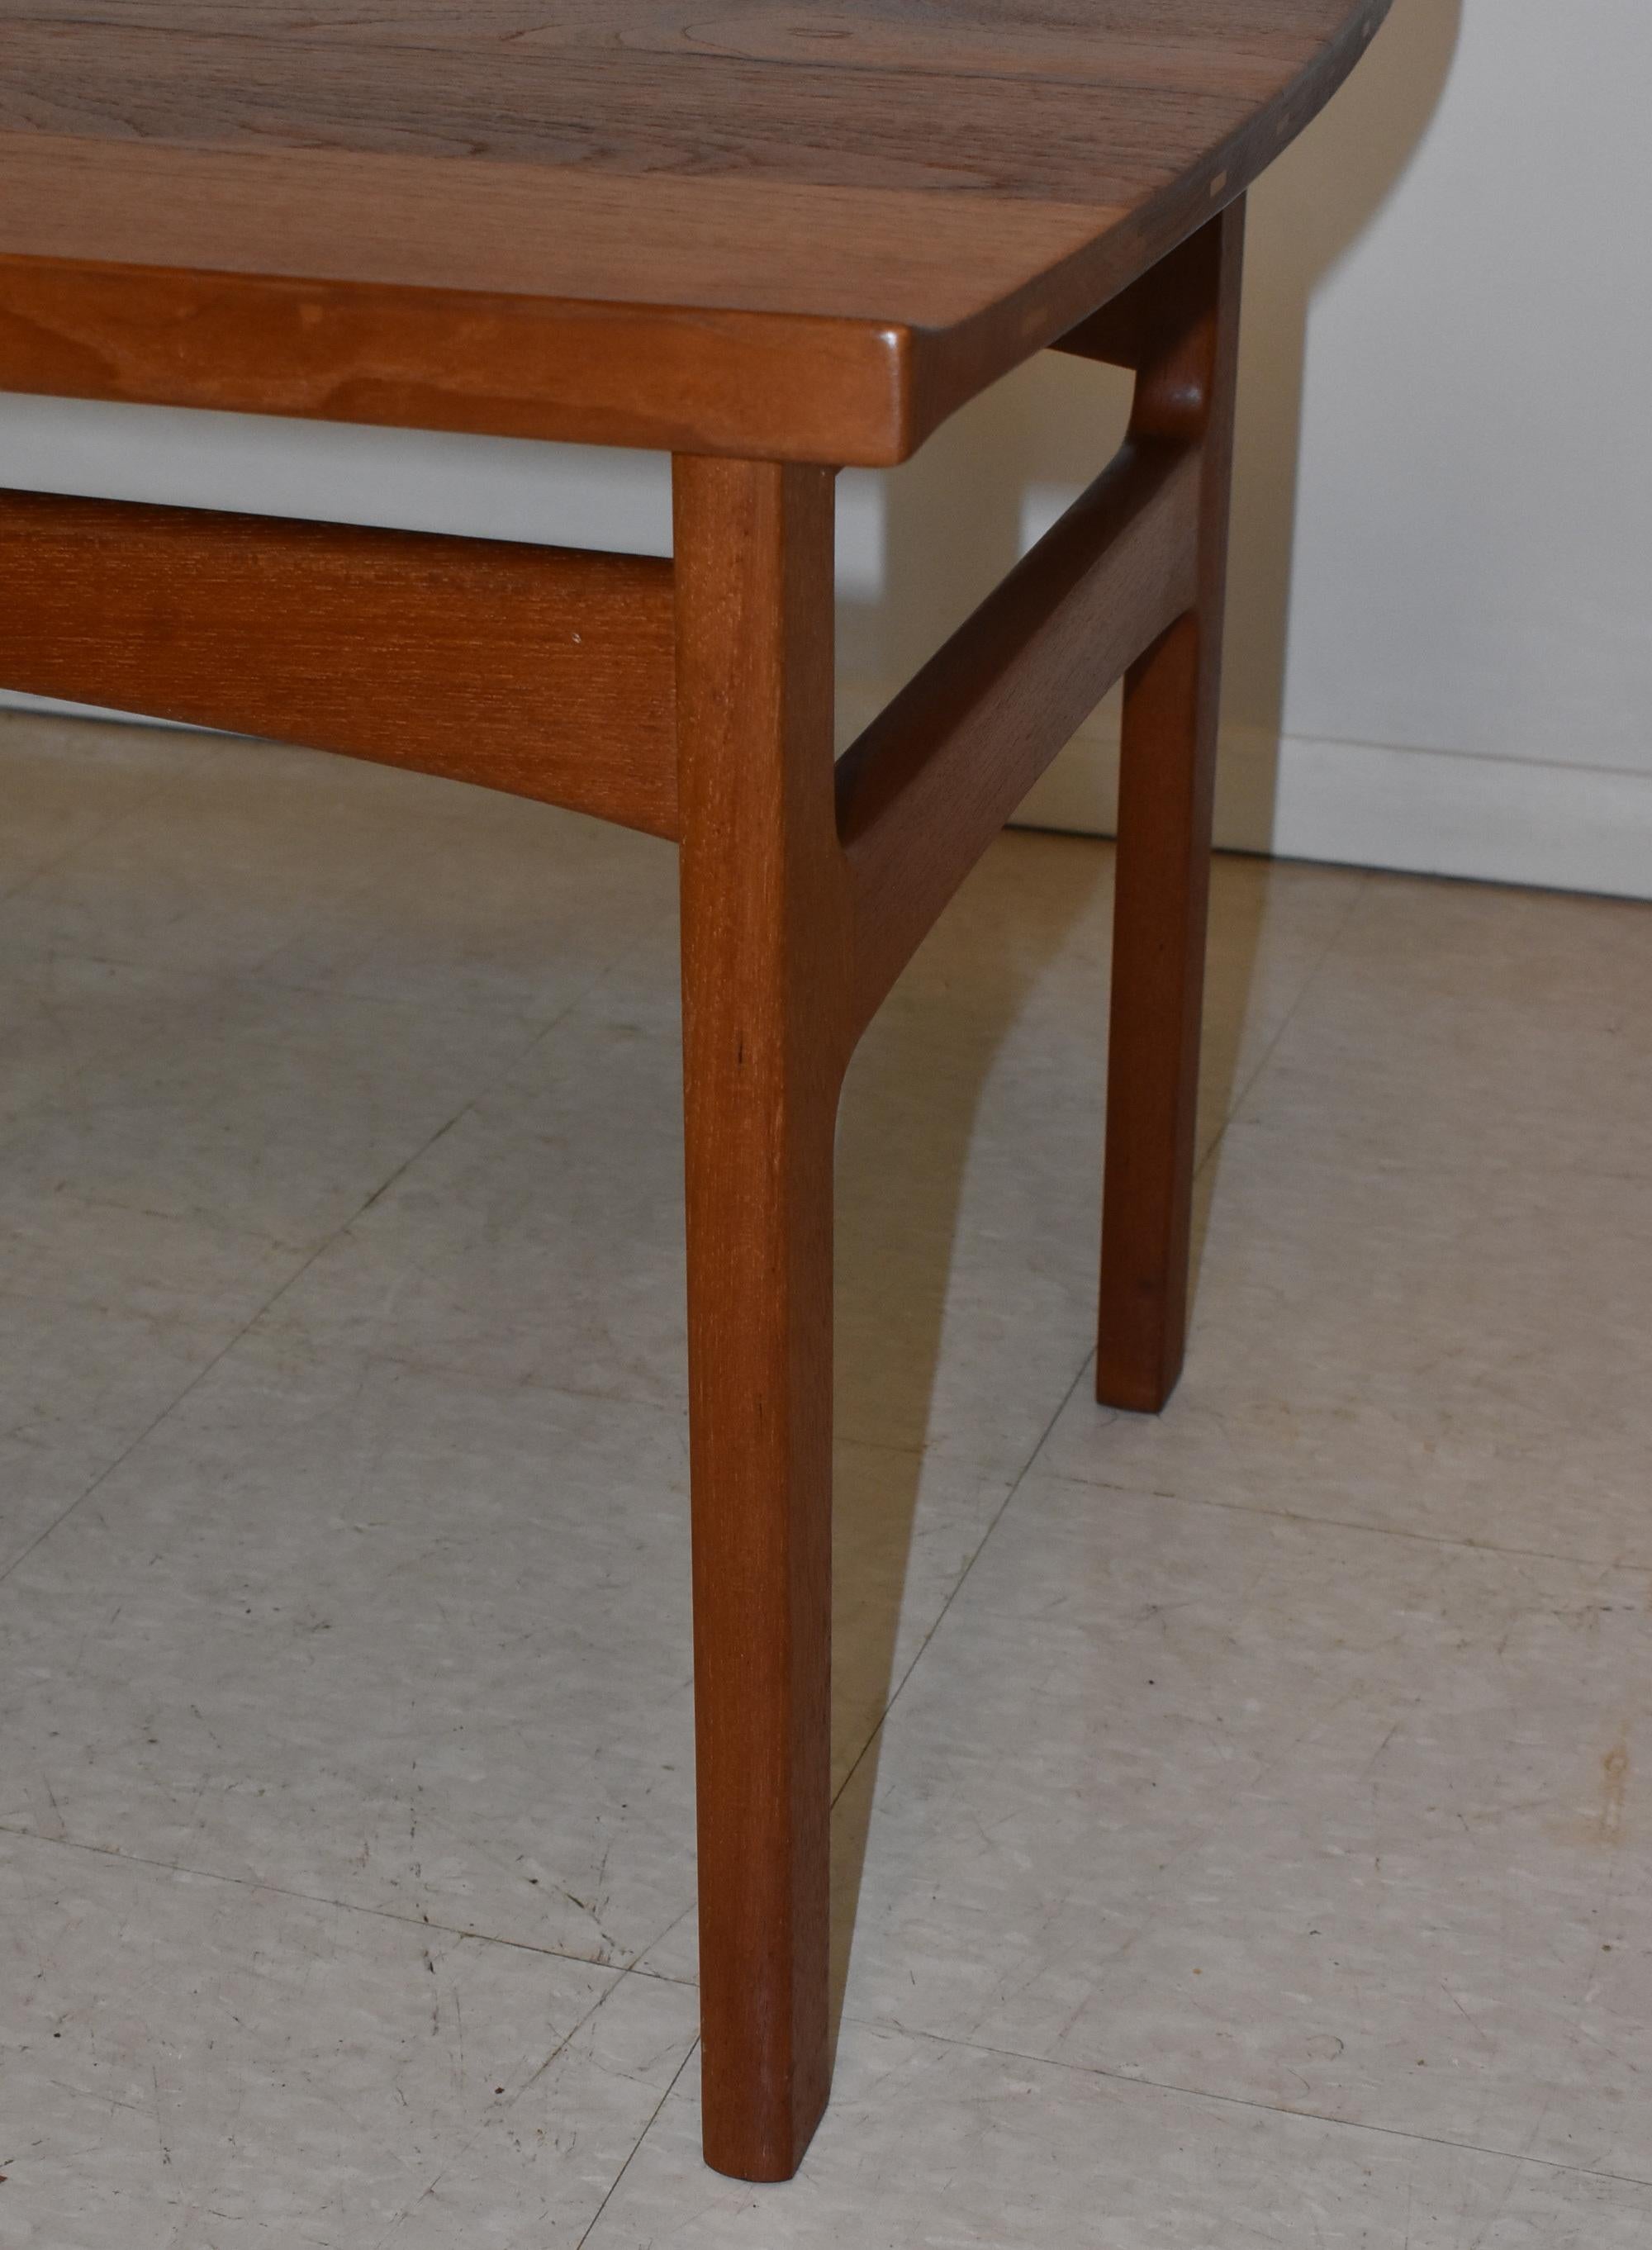 Danish modern teak side table Edvard Kindt Larsen Saffle design. Curled inlay edge. Signed on the bottom. Very good to excellent condition. Dimensions: 22